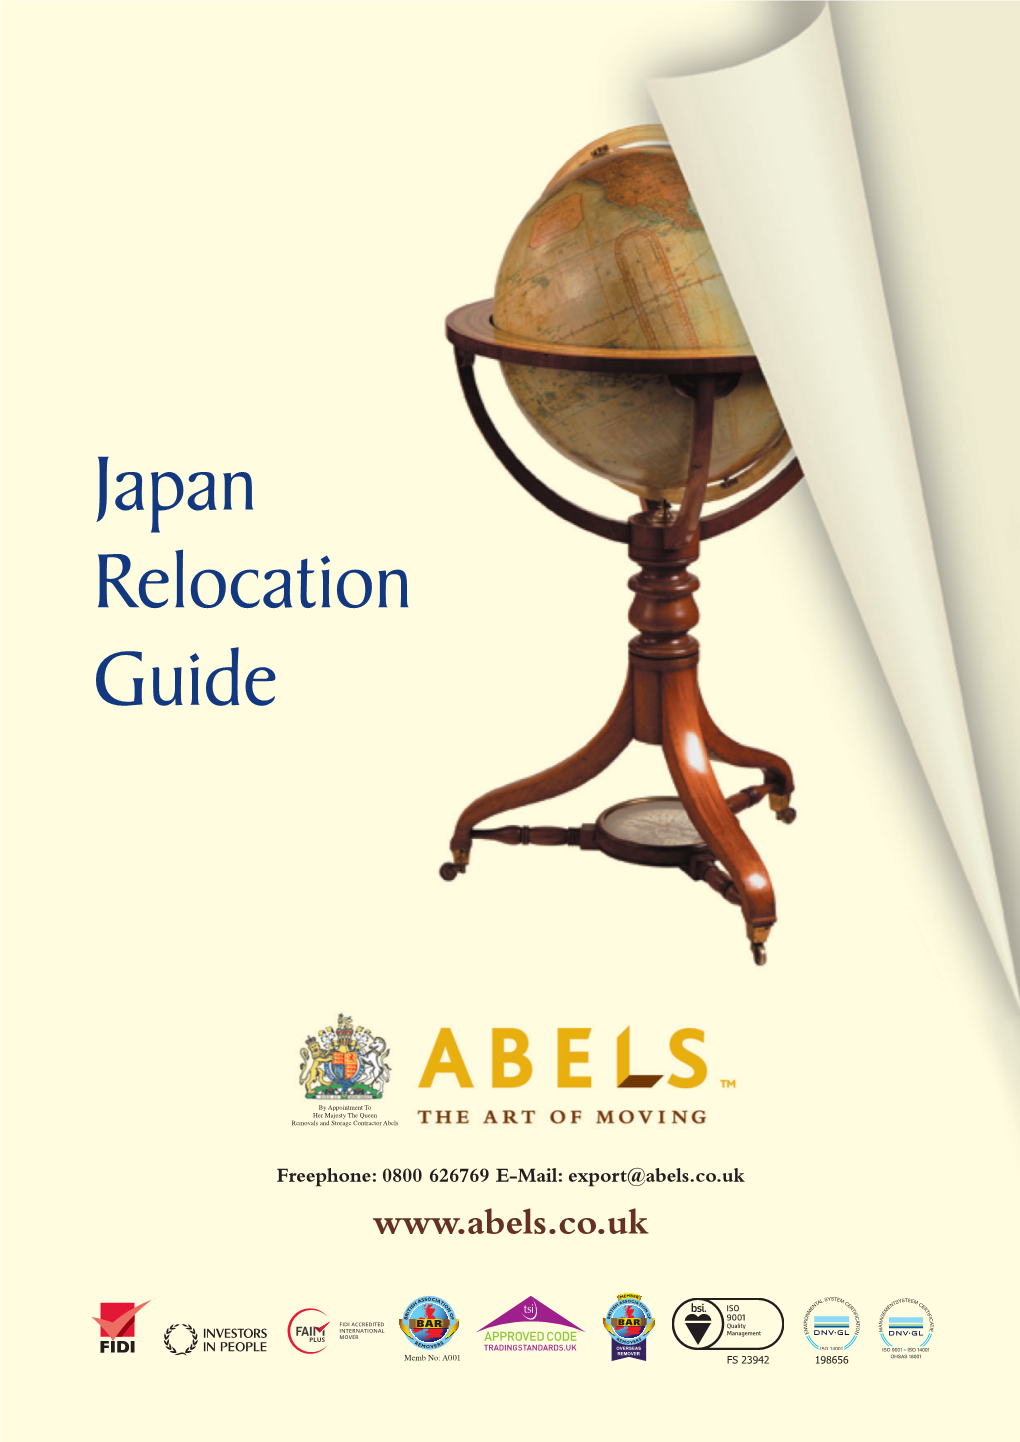 Japan Relocation Guide